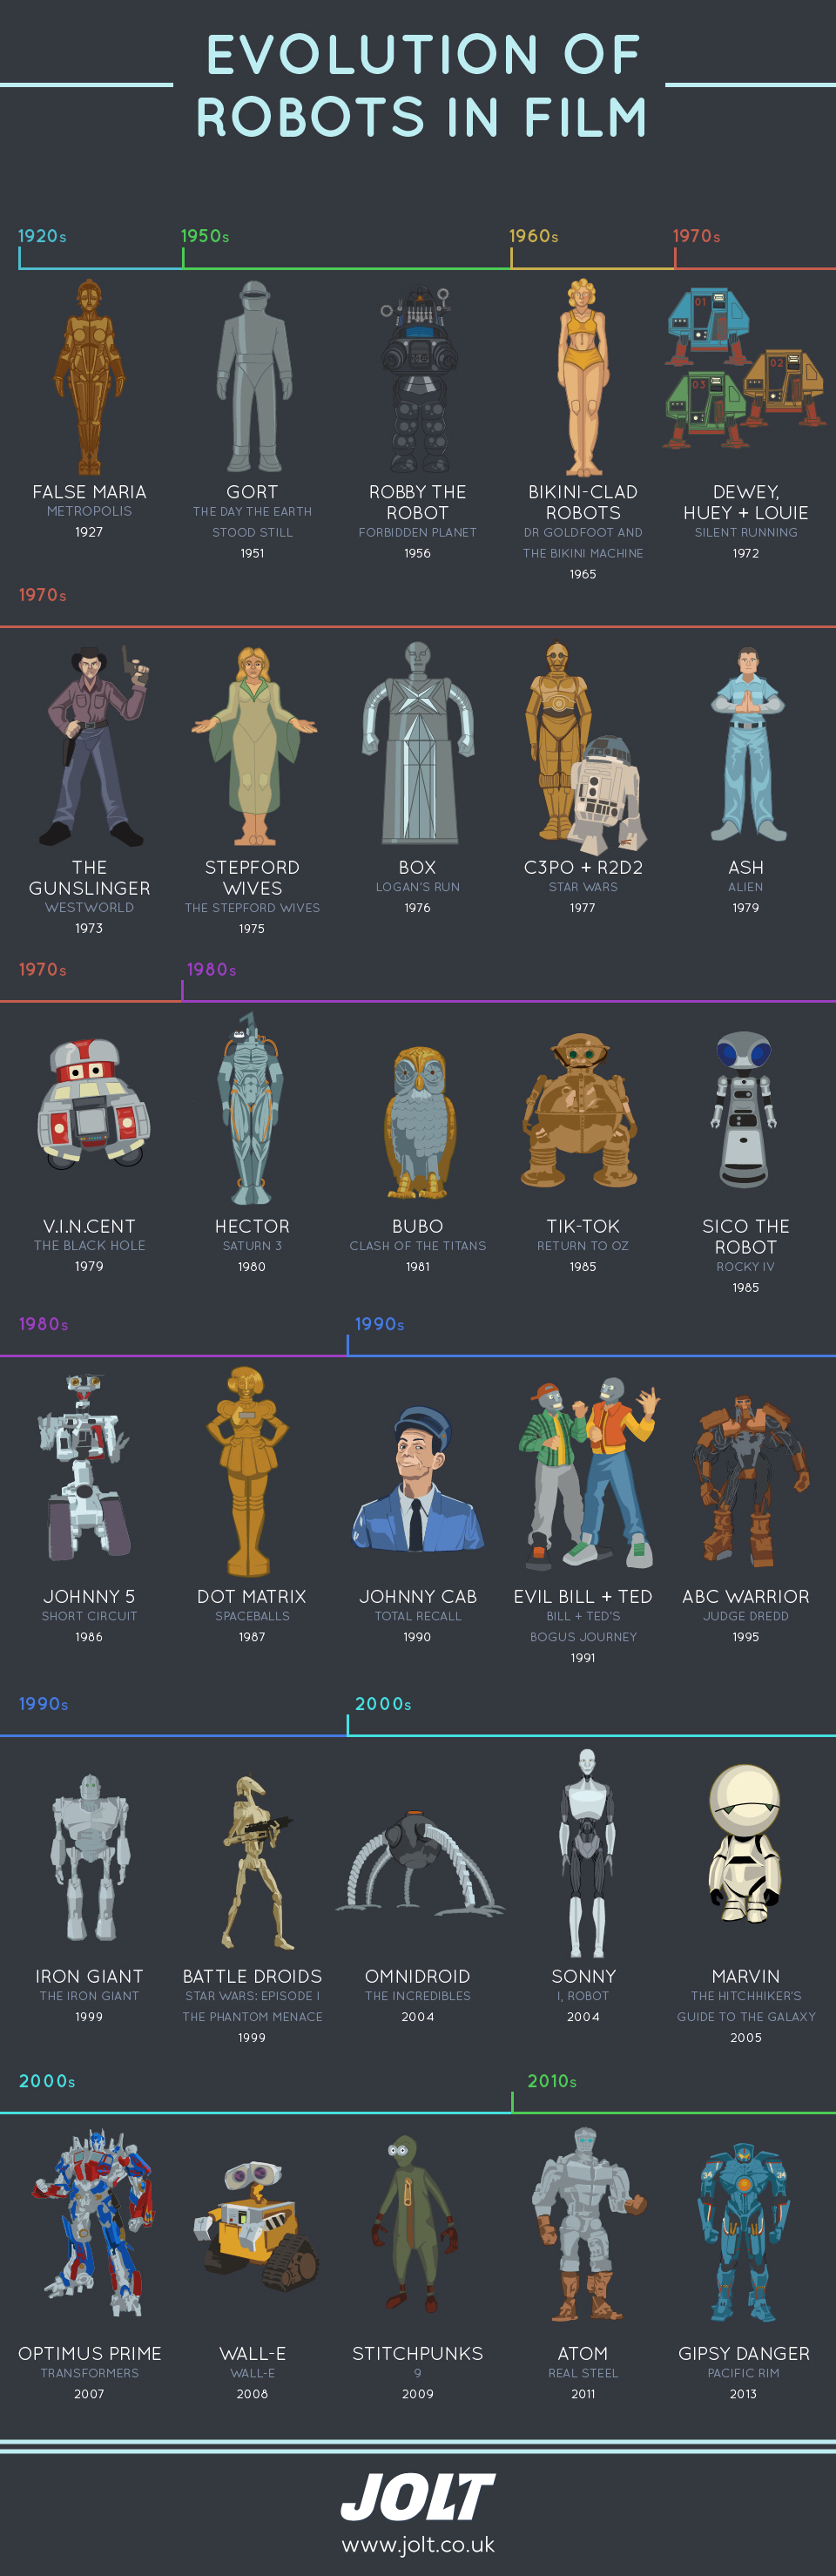 Evolution of Robots in Film infographic